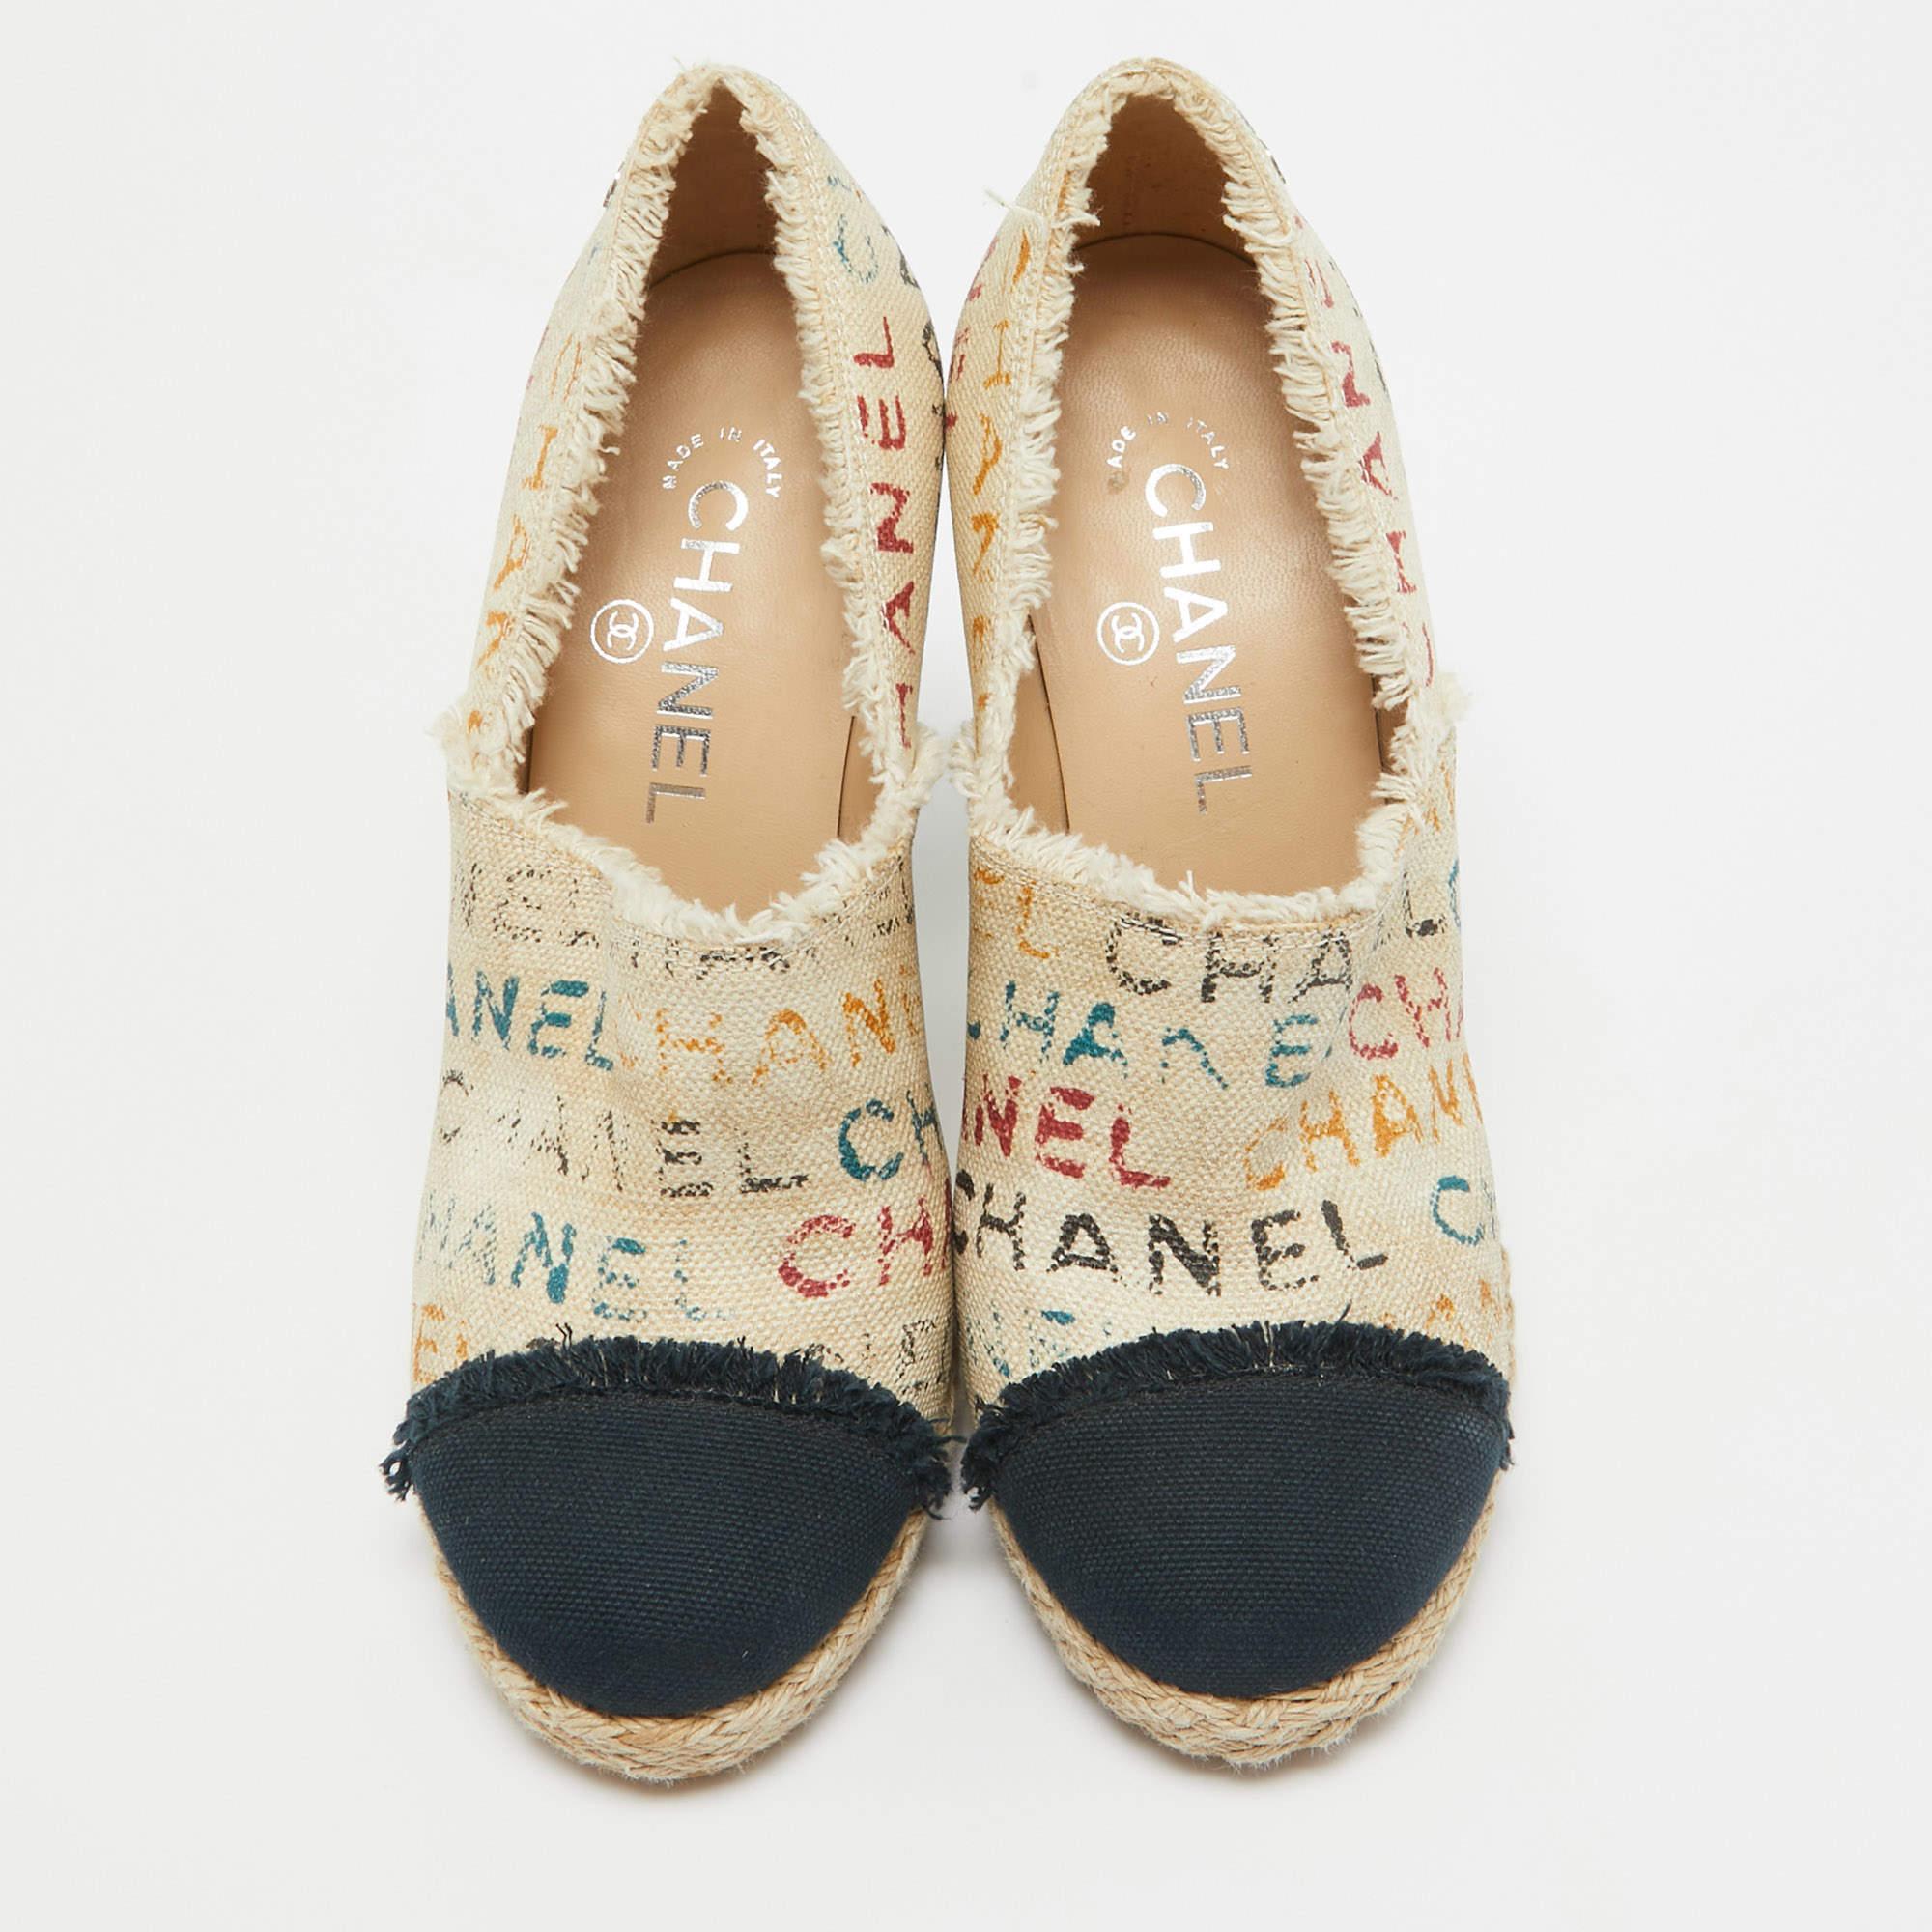 Deliver a signature look with these Chanel espadrille pumps. Crafted meticulously from canvas with chic graffiti detailing on the upper, they come in a lovely shade of beige that is contrasted with navy-blue cap toes. They are styled with low